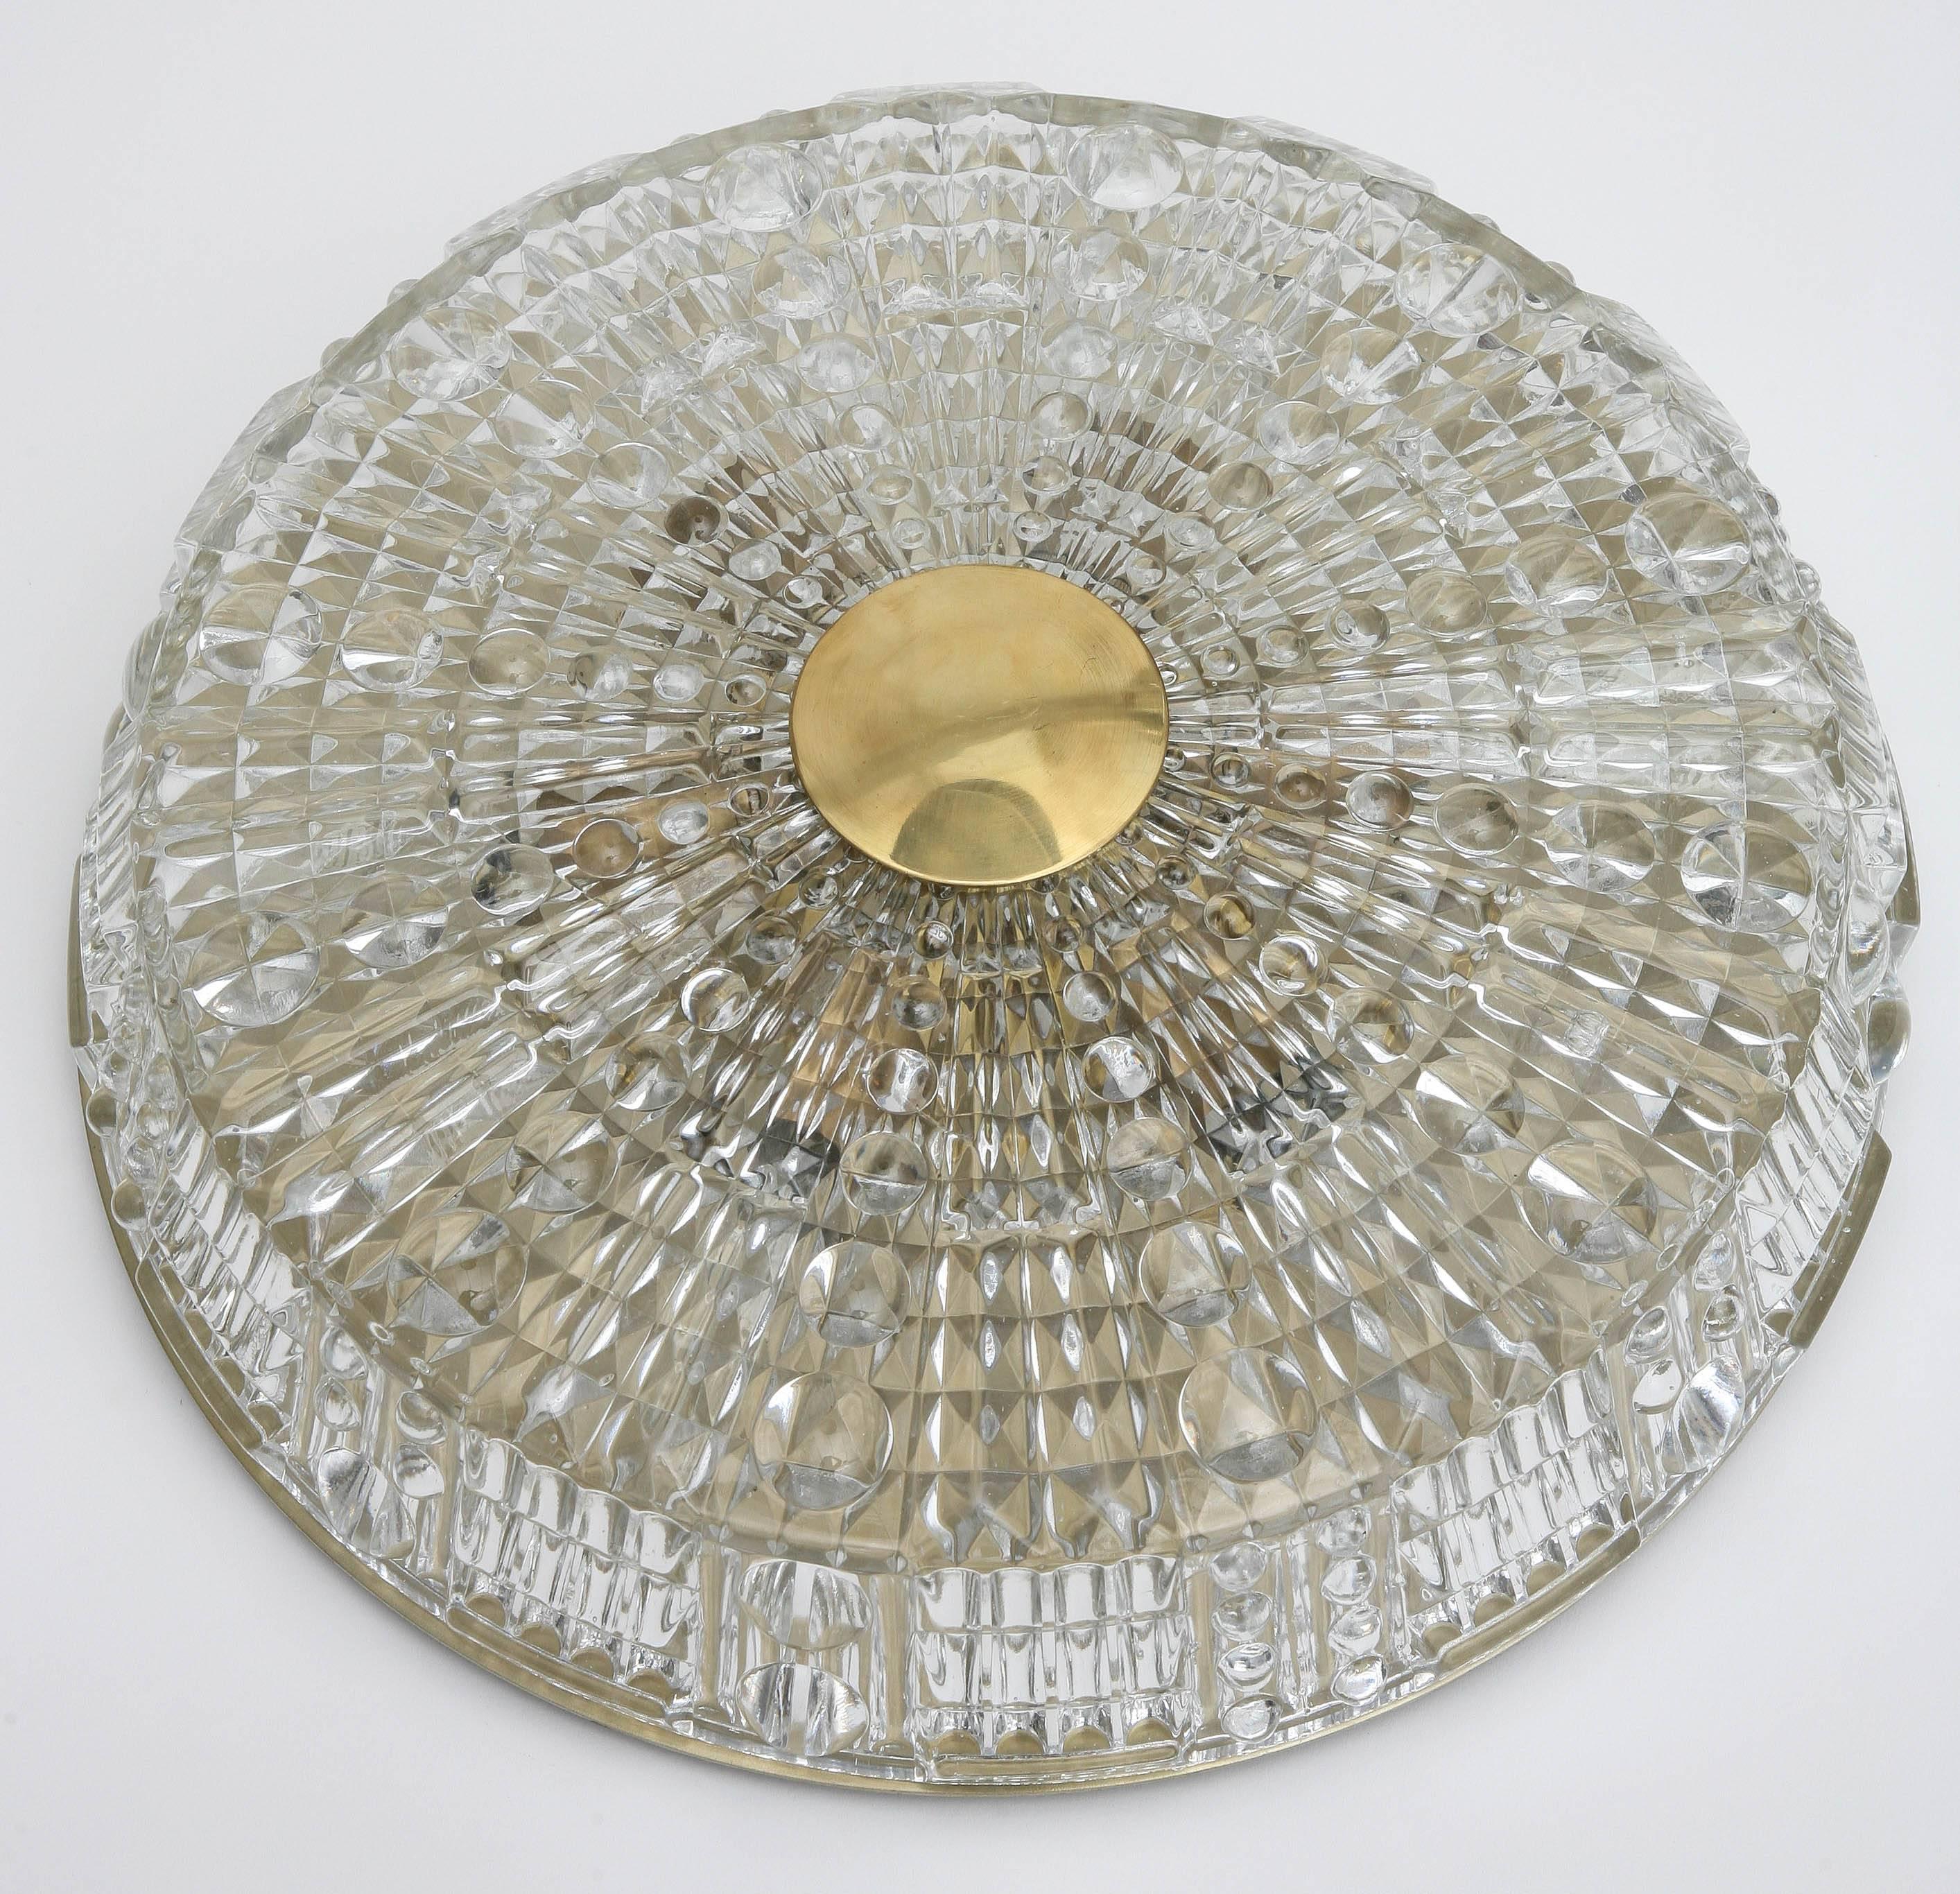 Pair of Orrefors crystal flush mount light fixtures by Carl Fagerlund, Classic.
Orrefors textured crystal in round and diamond design, each have six lights,
gilded brass backplate and round brass top cap, wired to US standards.
Measures: 14.75 in